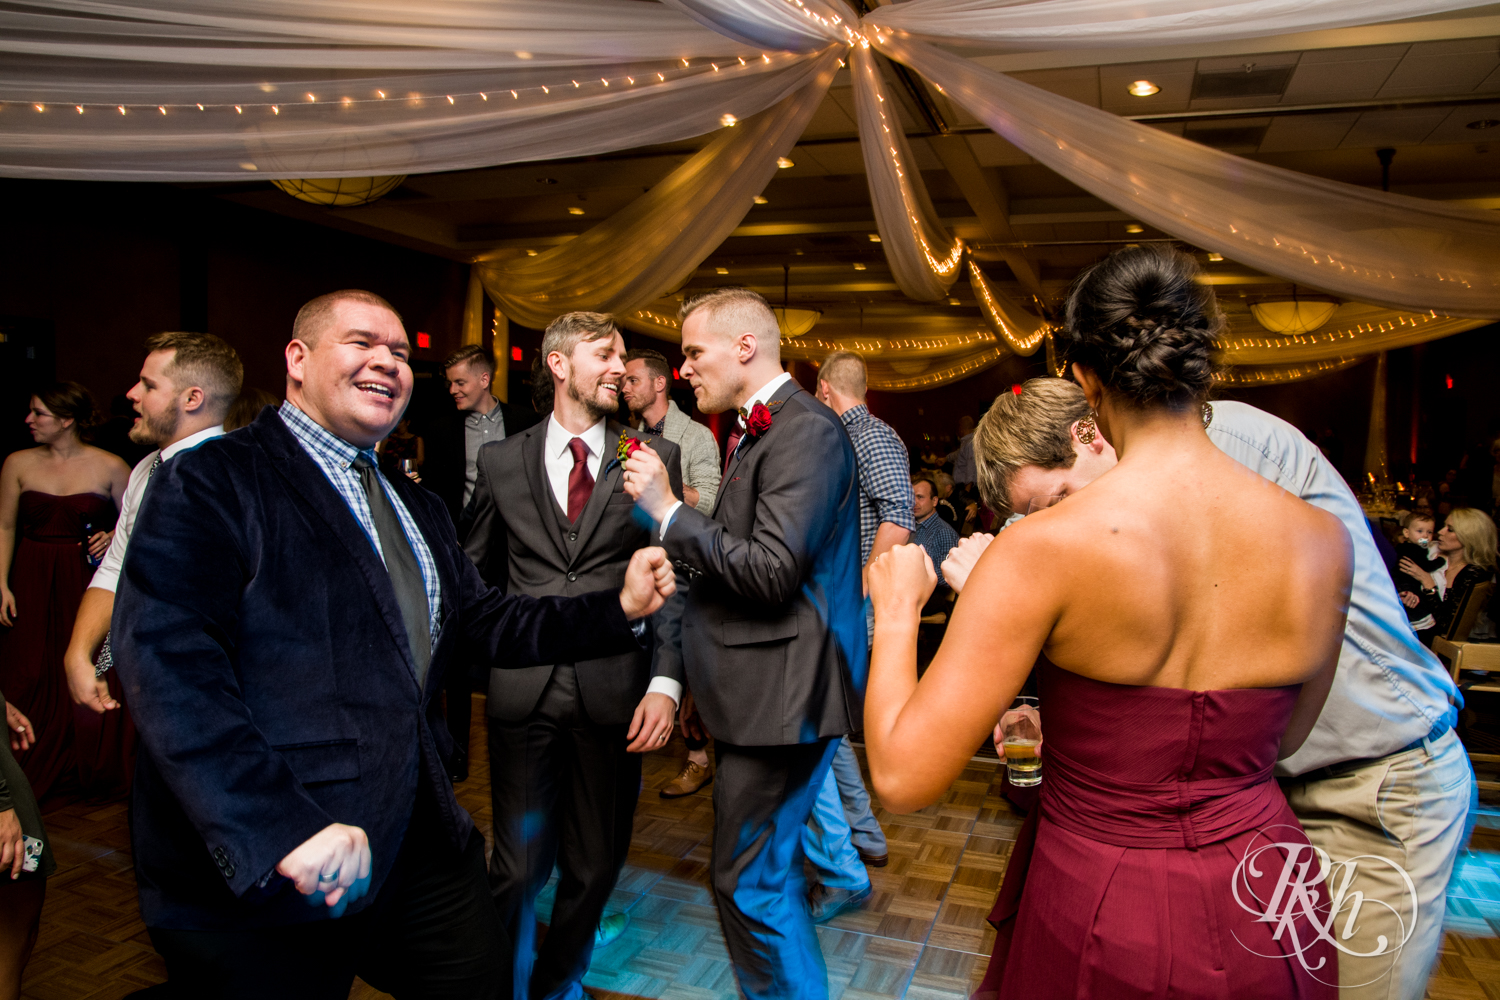 Guests dance at wedding reception at at Courtyard by Marriott Minneapolis.